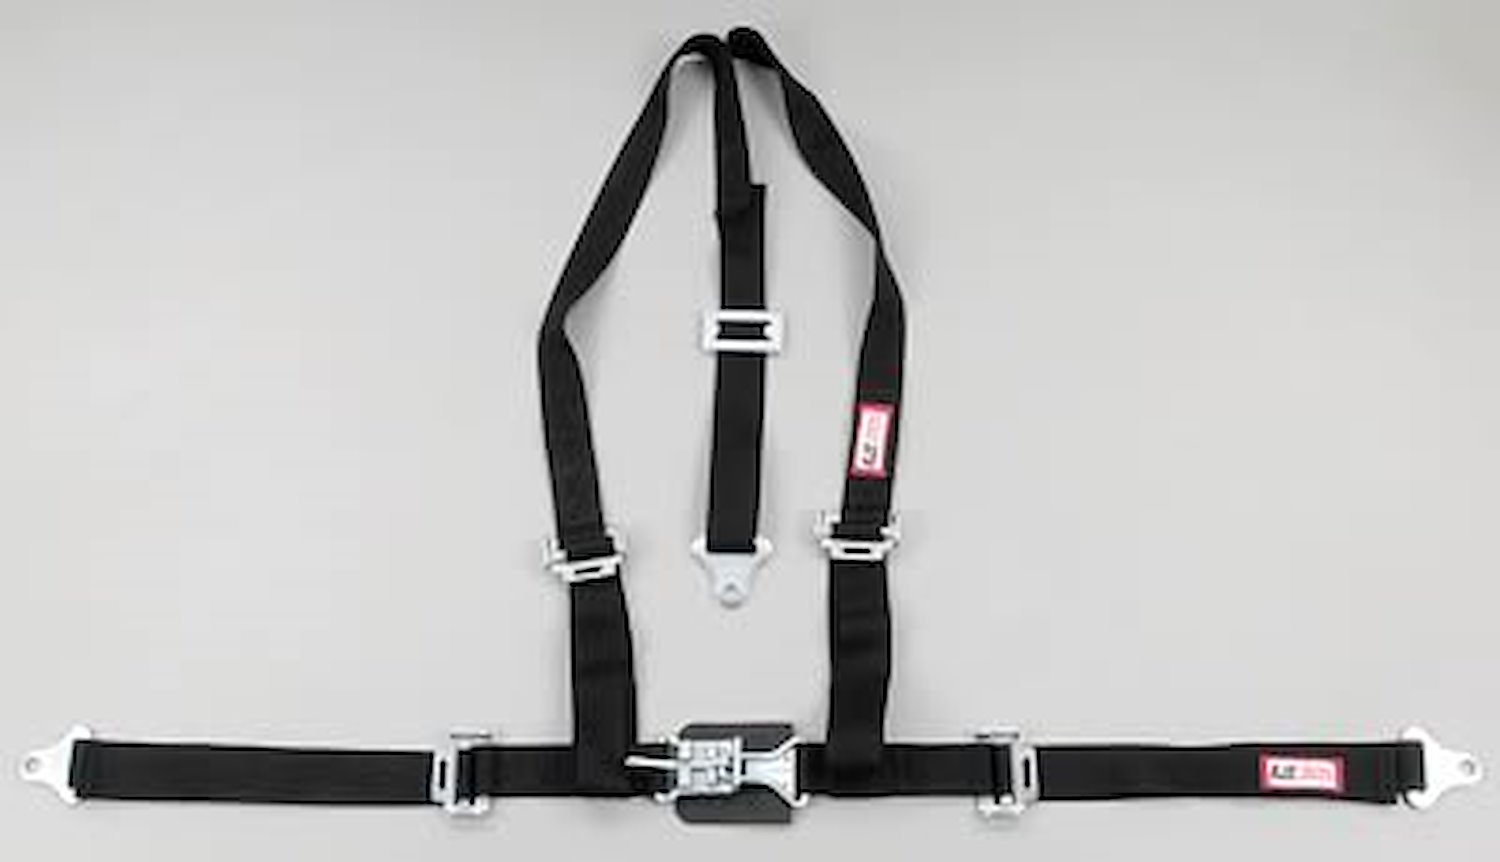 NON-SFI L&L HARNESS 2 PULL UP Lap Belt SEWN IN 2 S.H. Y FLOOR Mount w/STERNUM STRAP ALL WRAP ENDS PURPLE